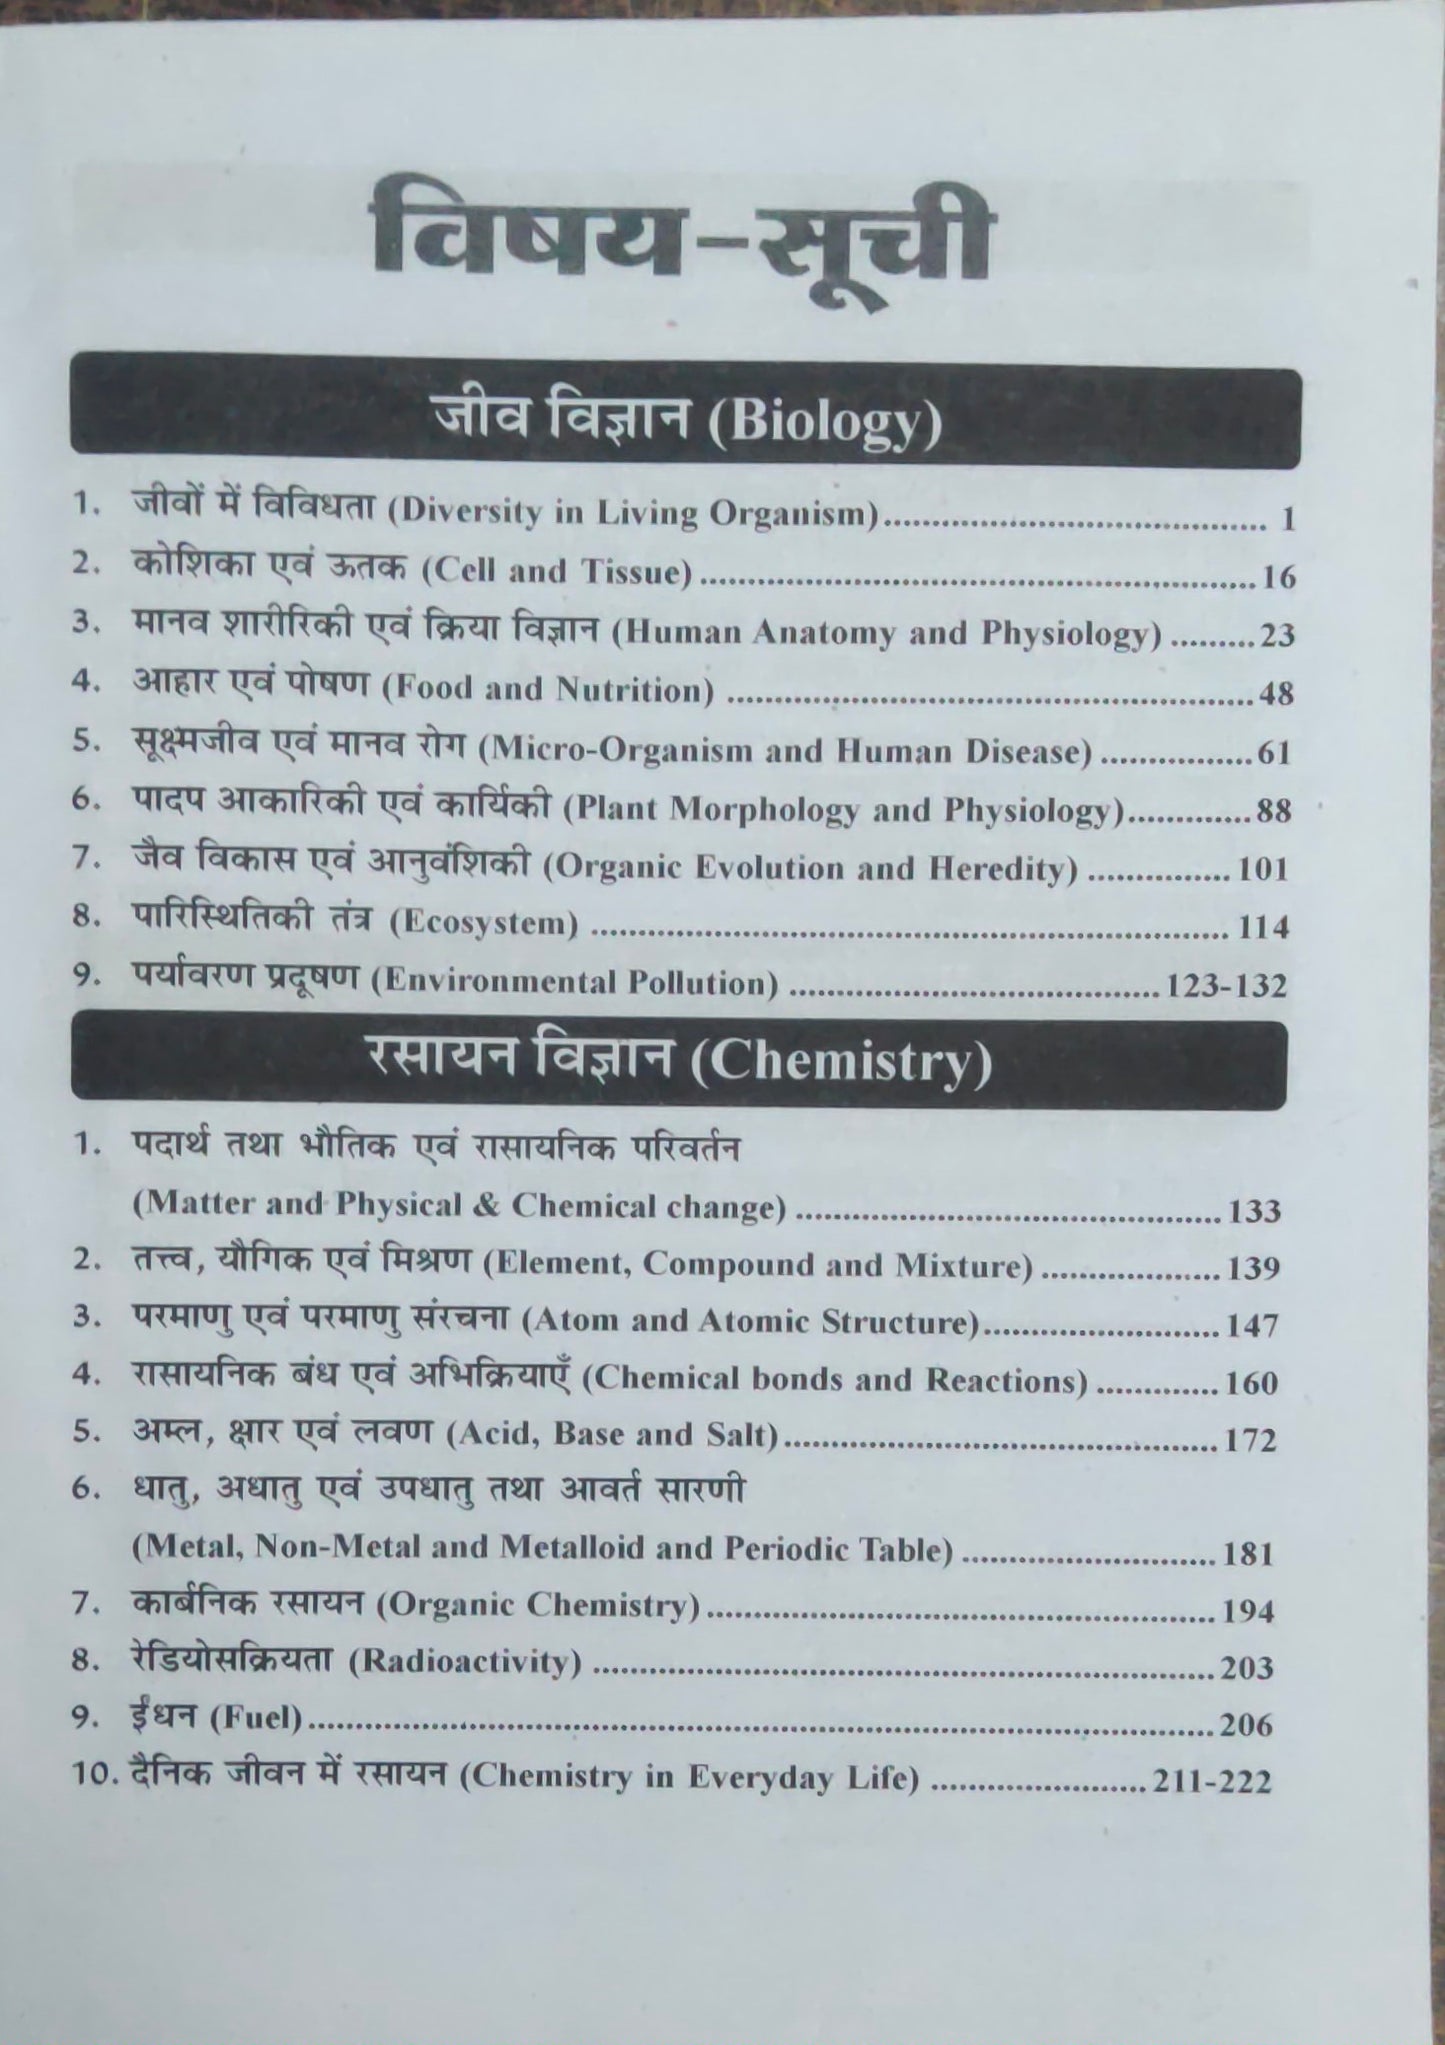 Lakshya ALL EXAM SCANNER SCIENCE (all exam review)